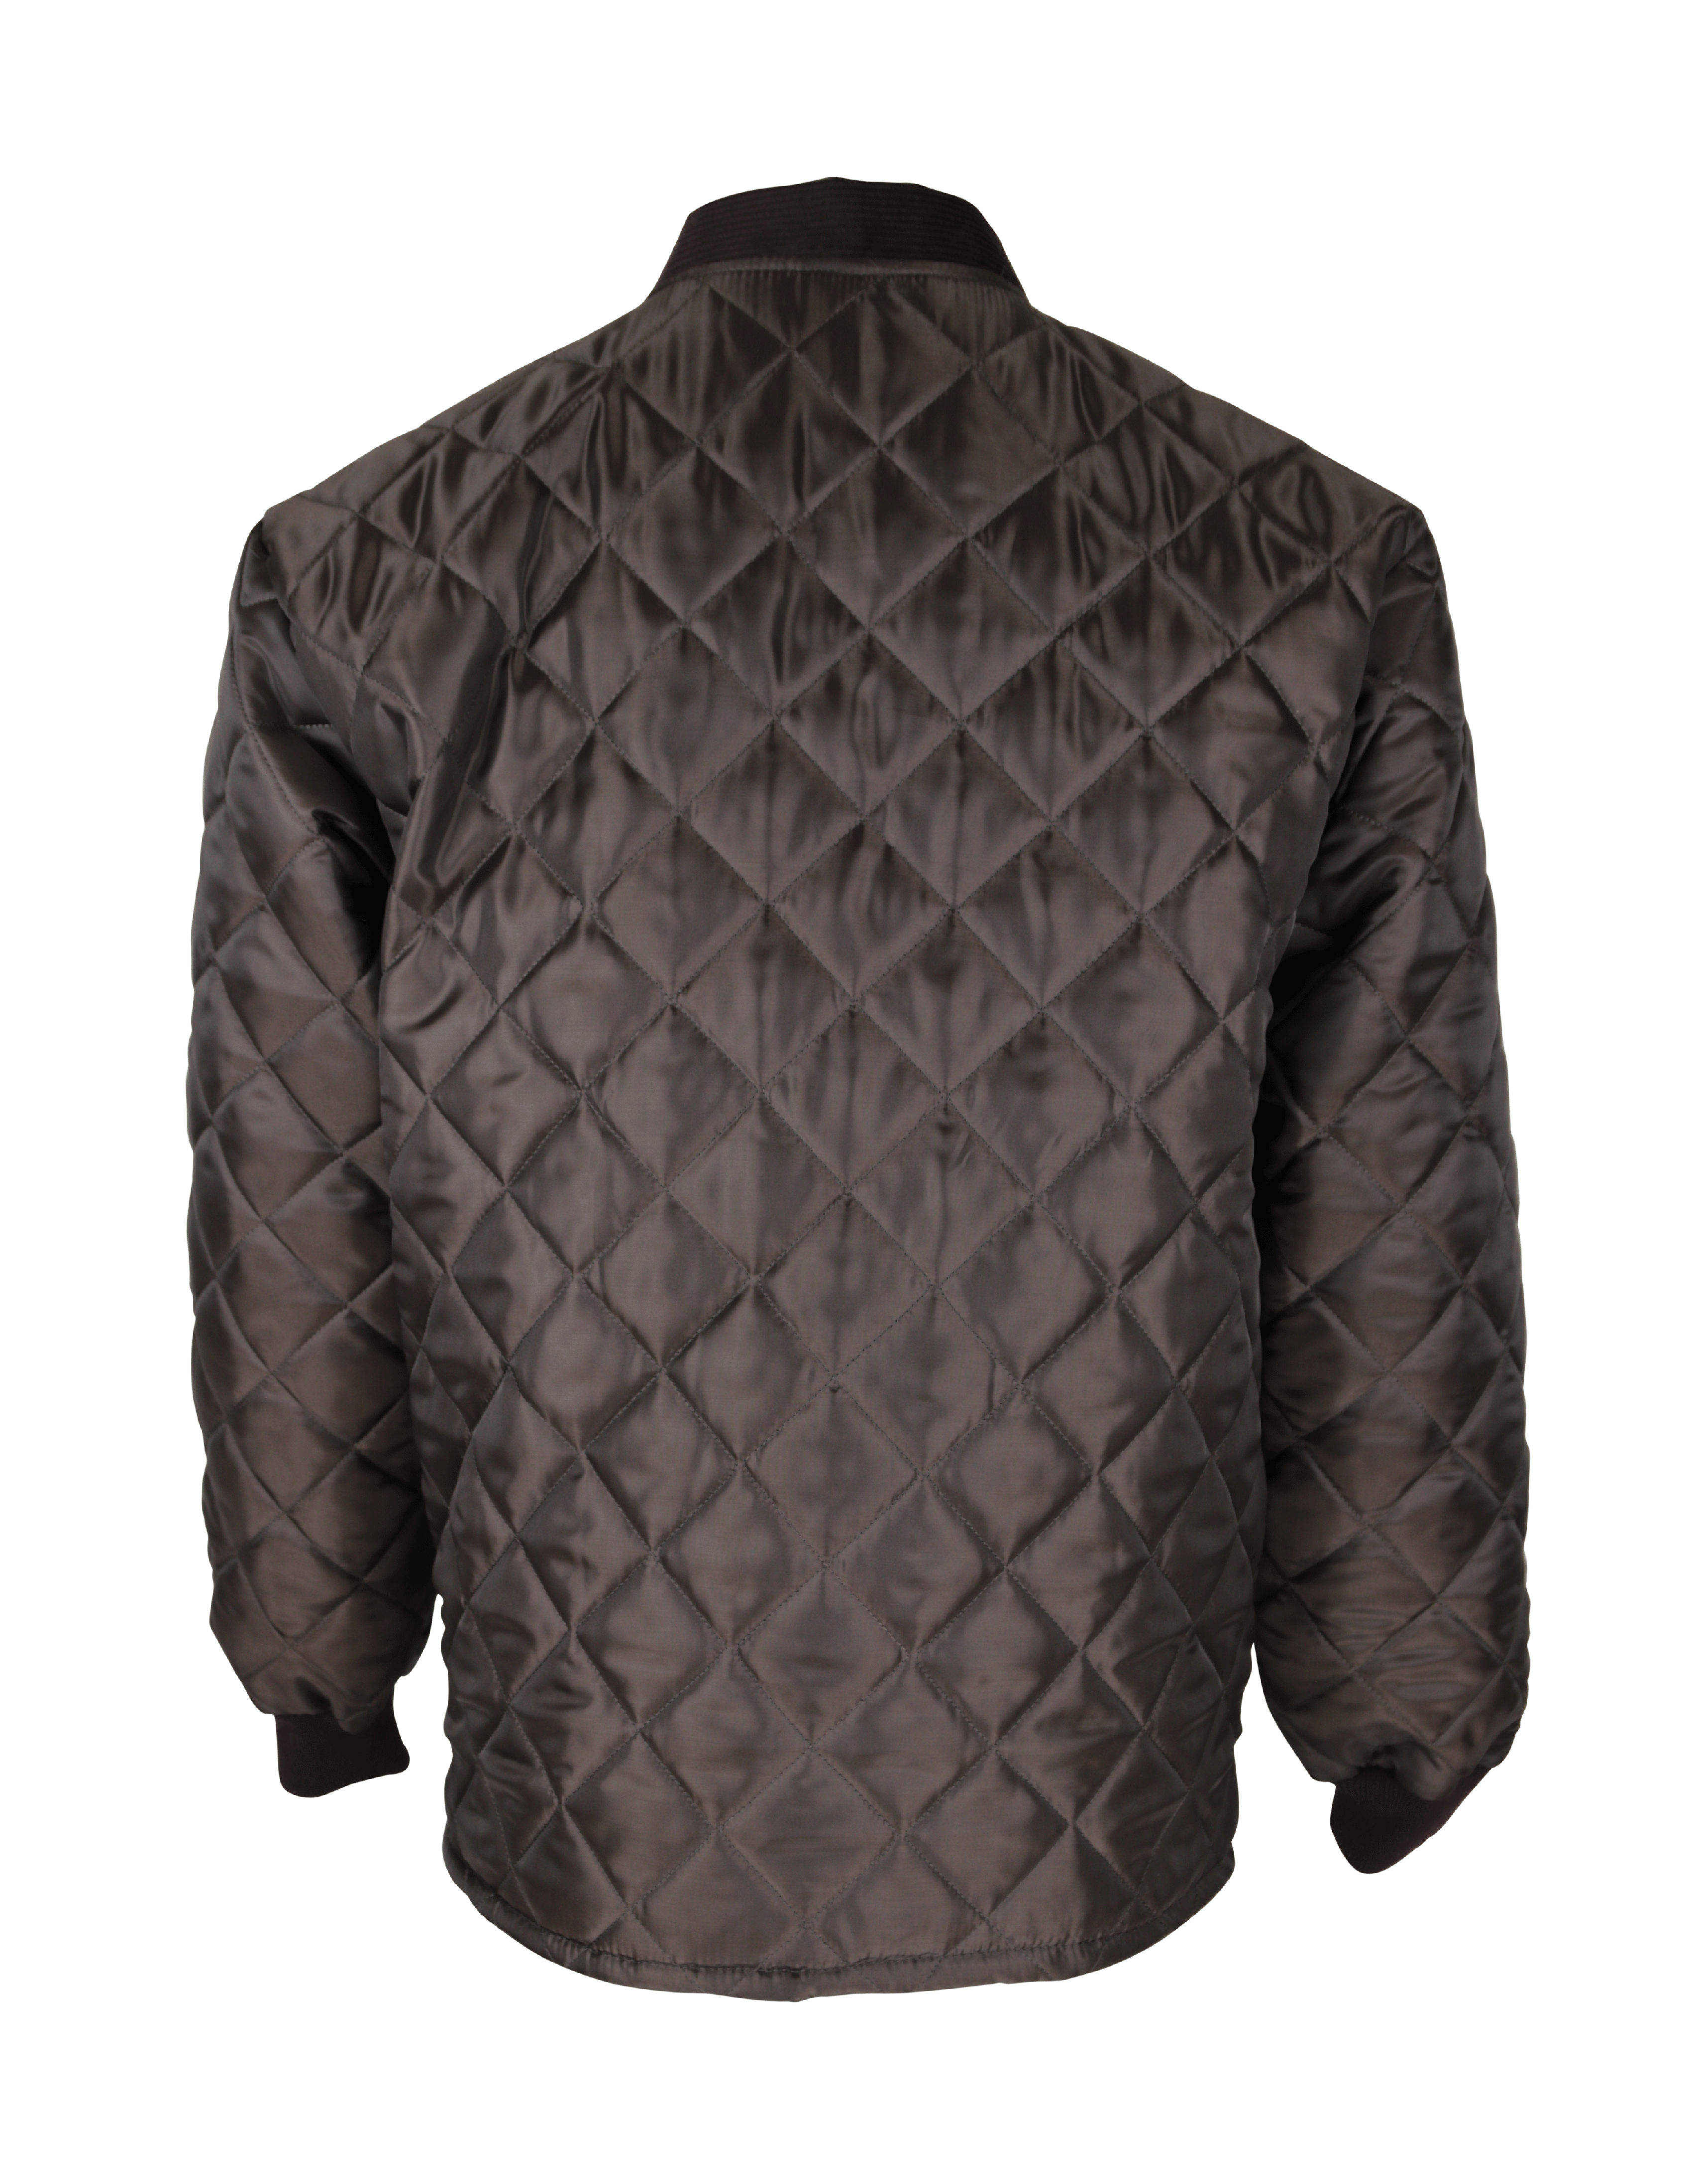 W21 - Bray 3 in 1 Wax Jacket (Vented) - BROWN